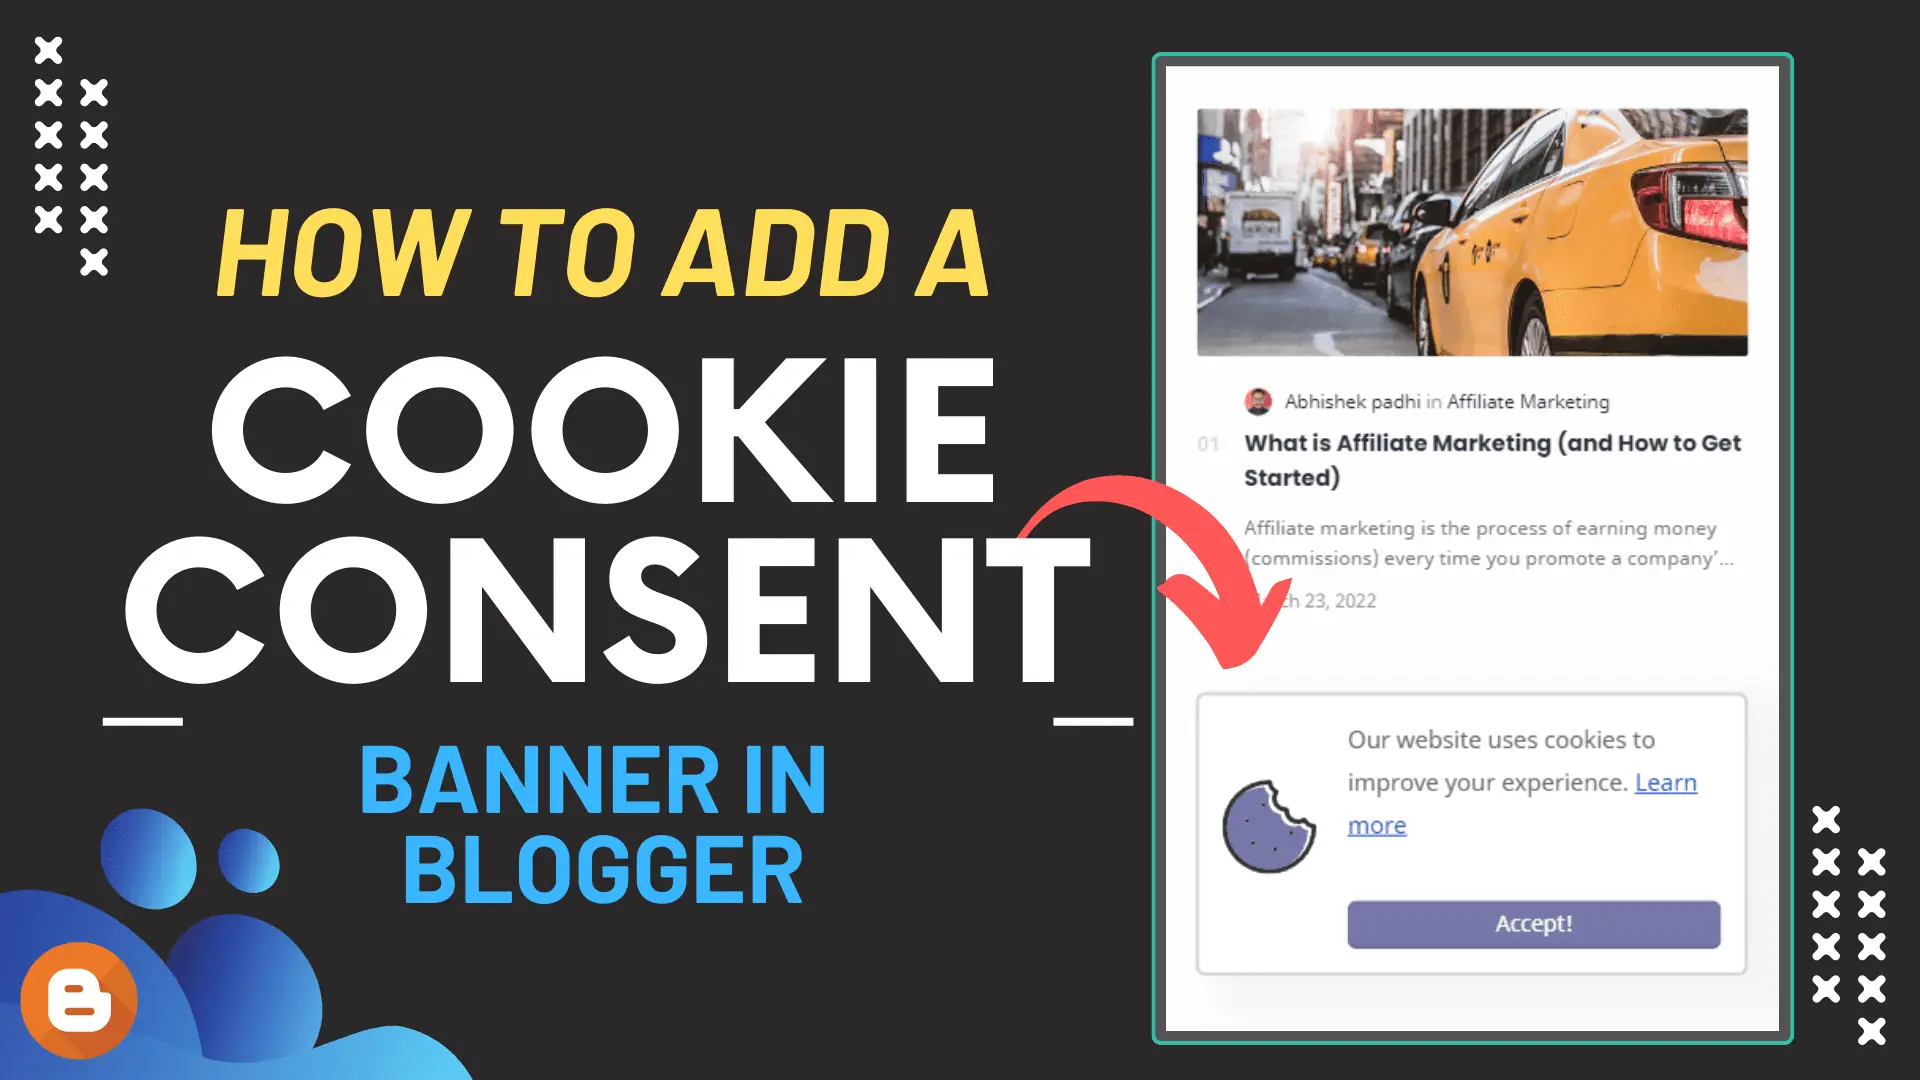 How to Add a Cookie Consent Banner in Blogger